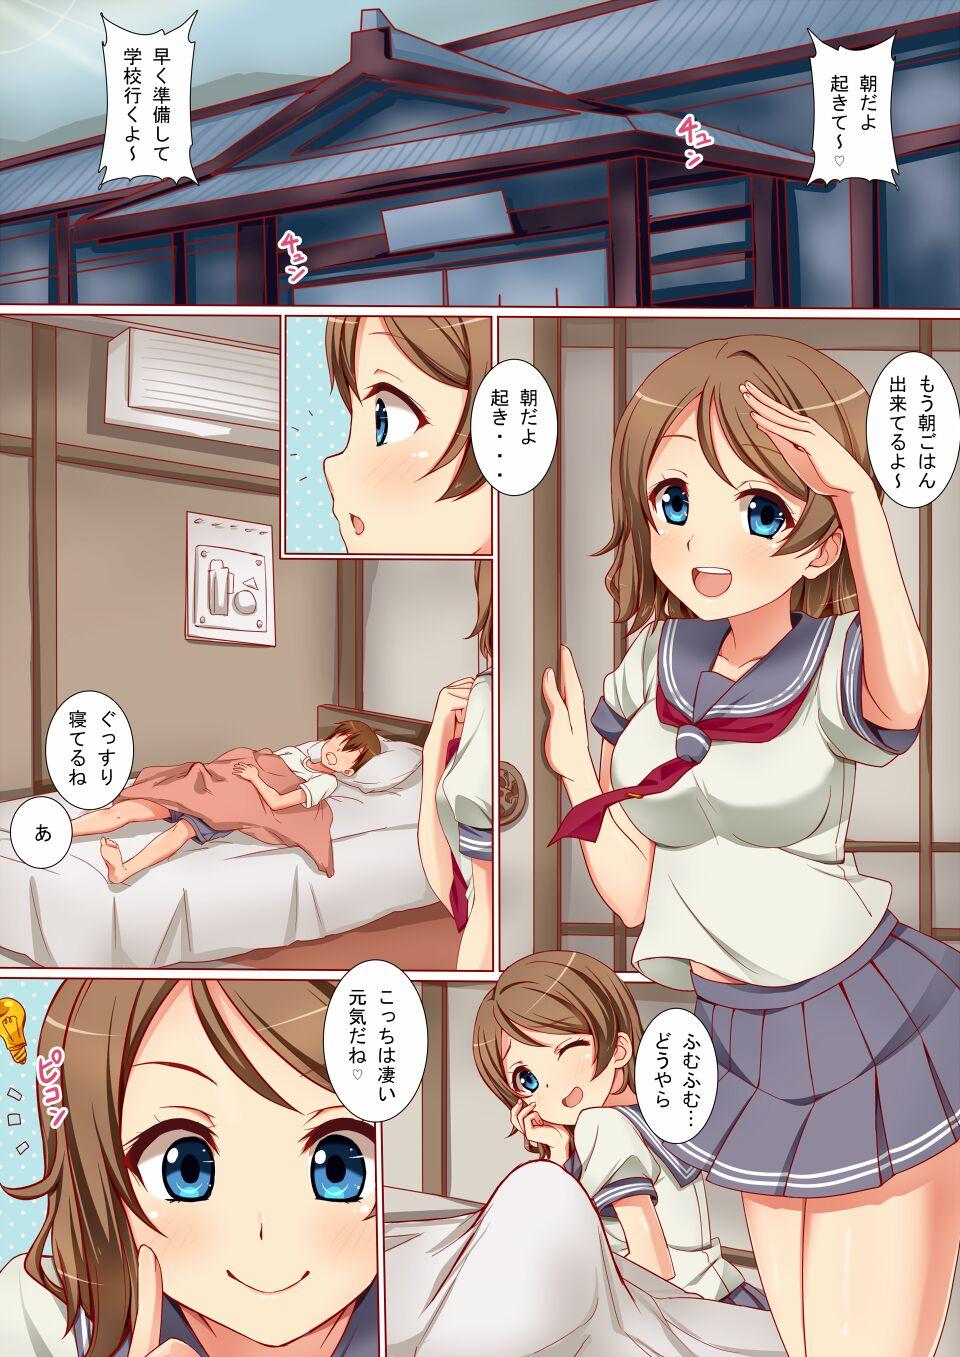 Gloryhole Morning flirting between two people - Love live sunshine Top - Page 2